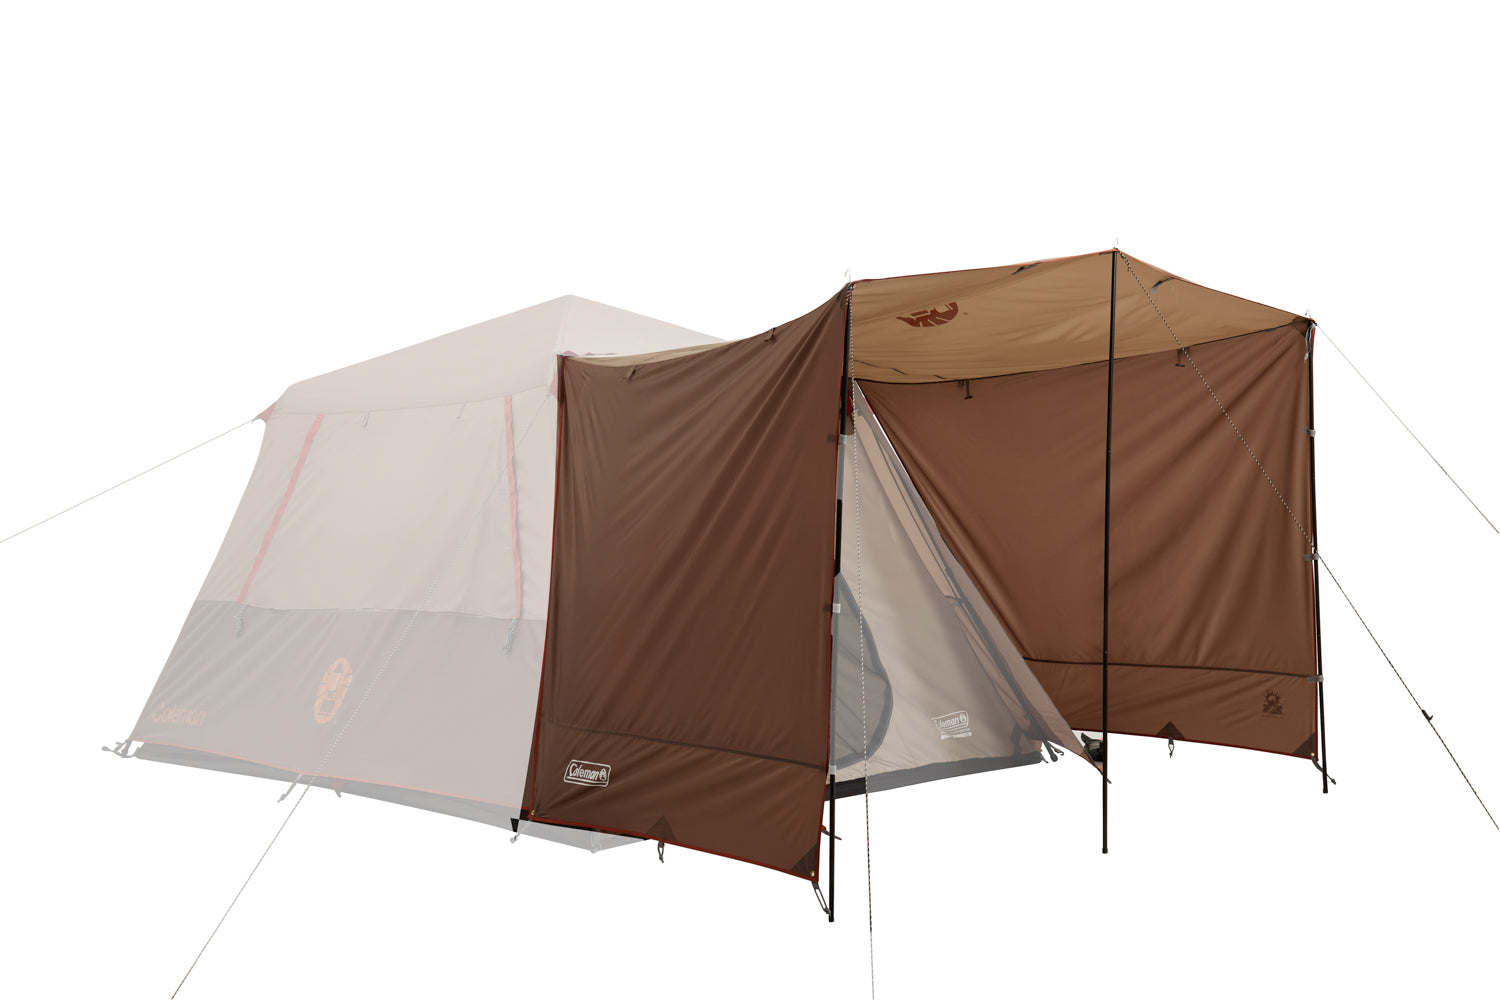 Coleman Silver Series Evo Shade To Fit Silver Series Evo 4 Person Tent